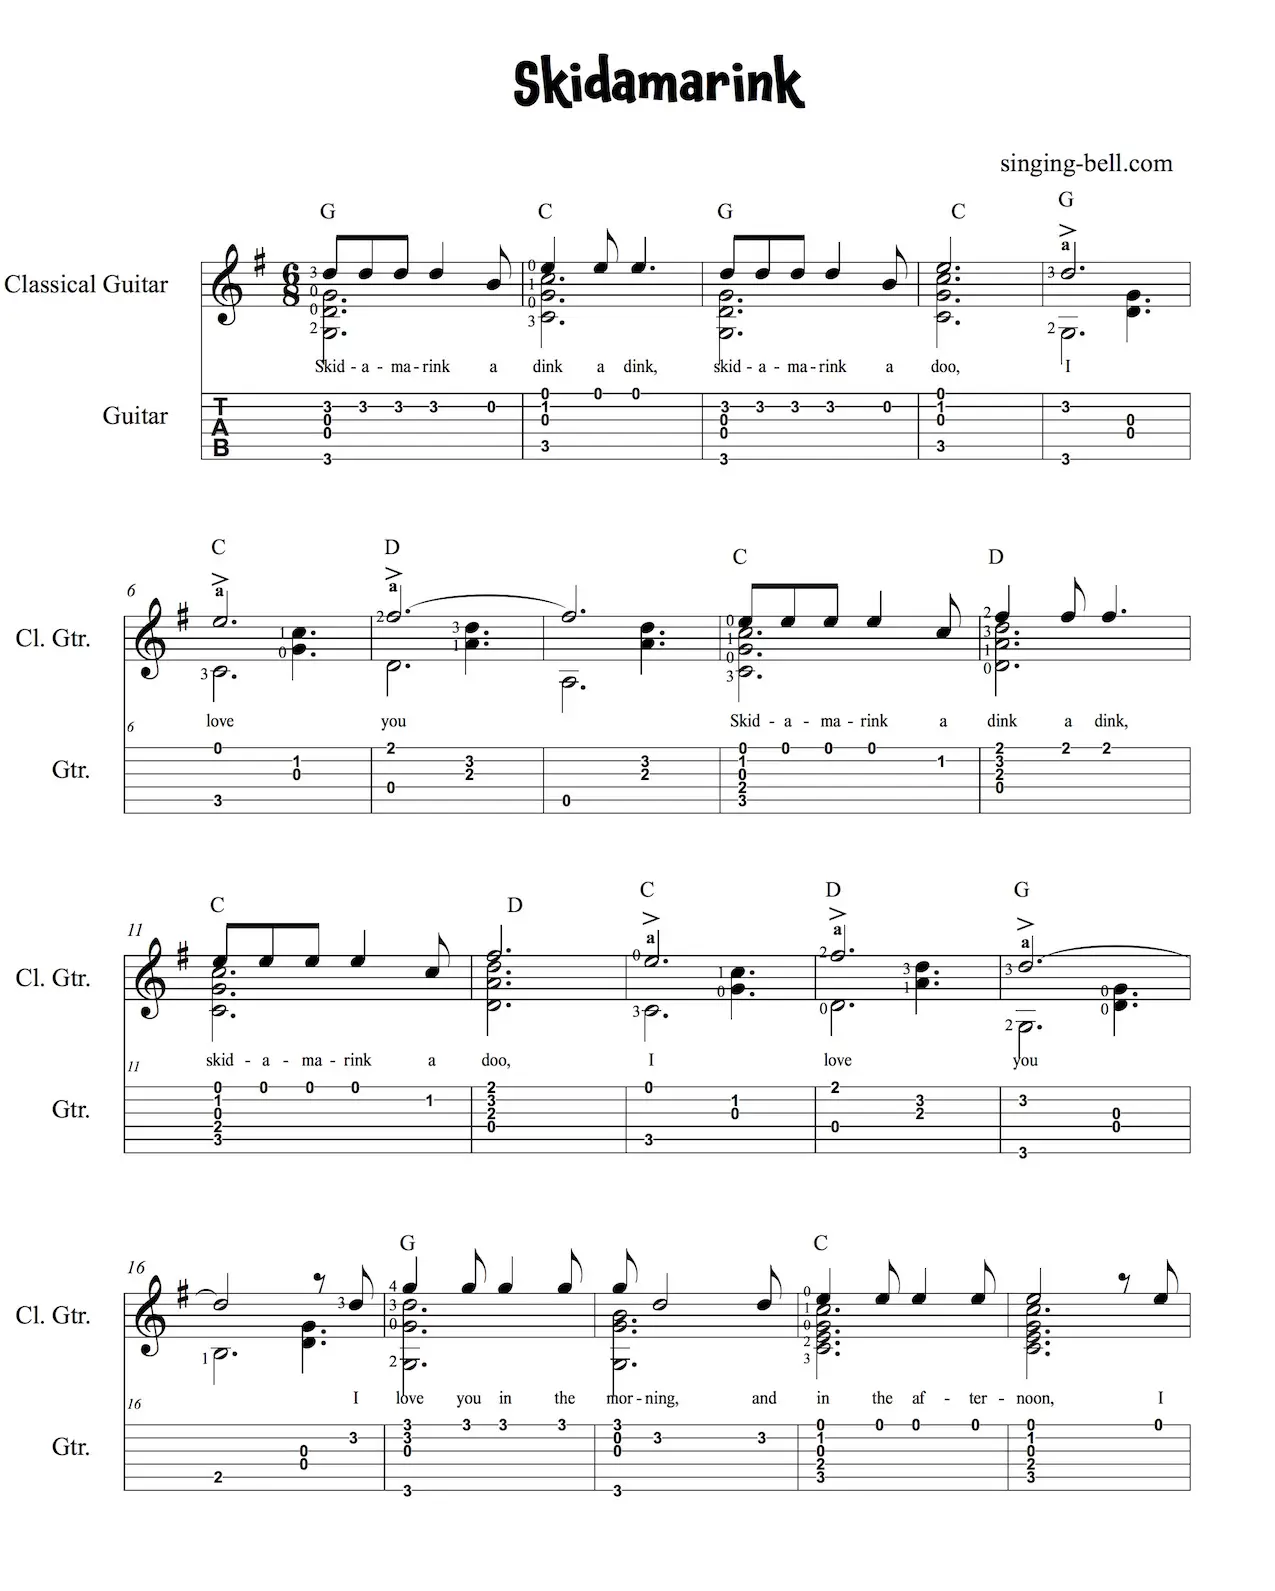 Skidamarink Easy Guitar Sheet Music for beginners with notes and tablature page 1.